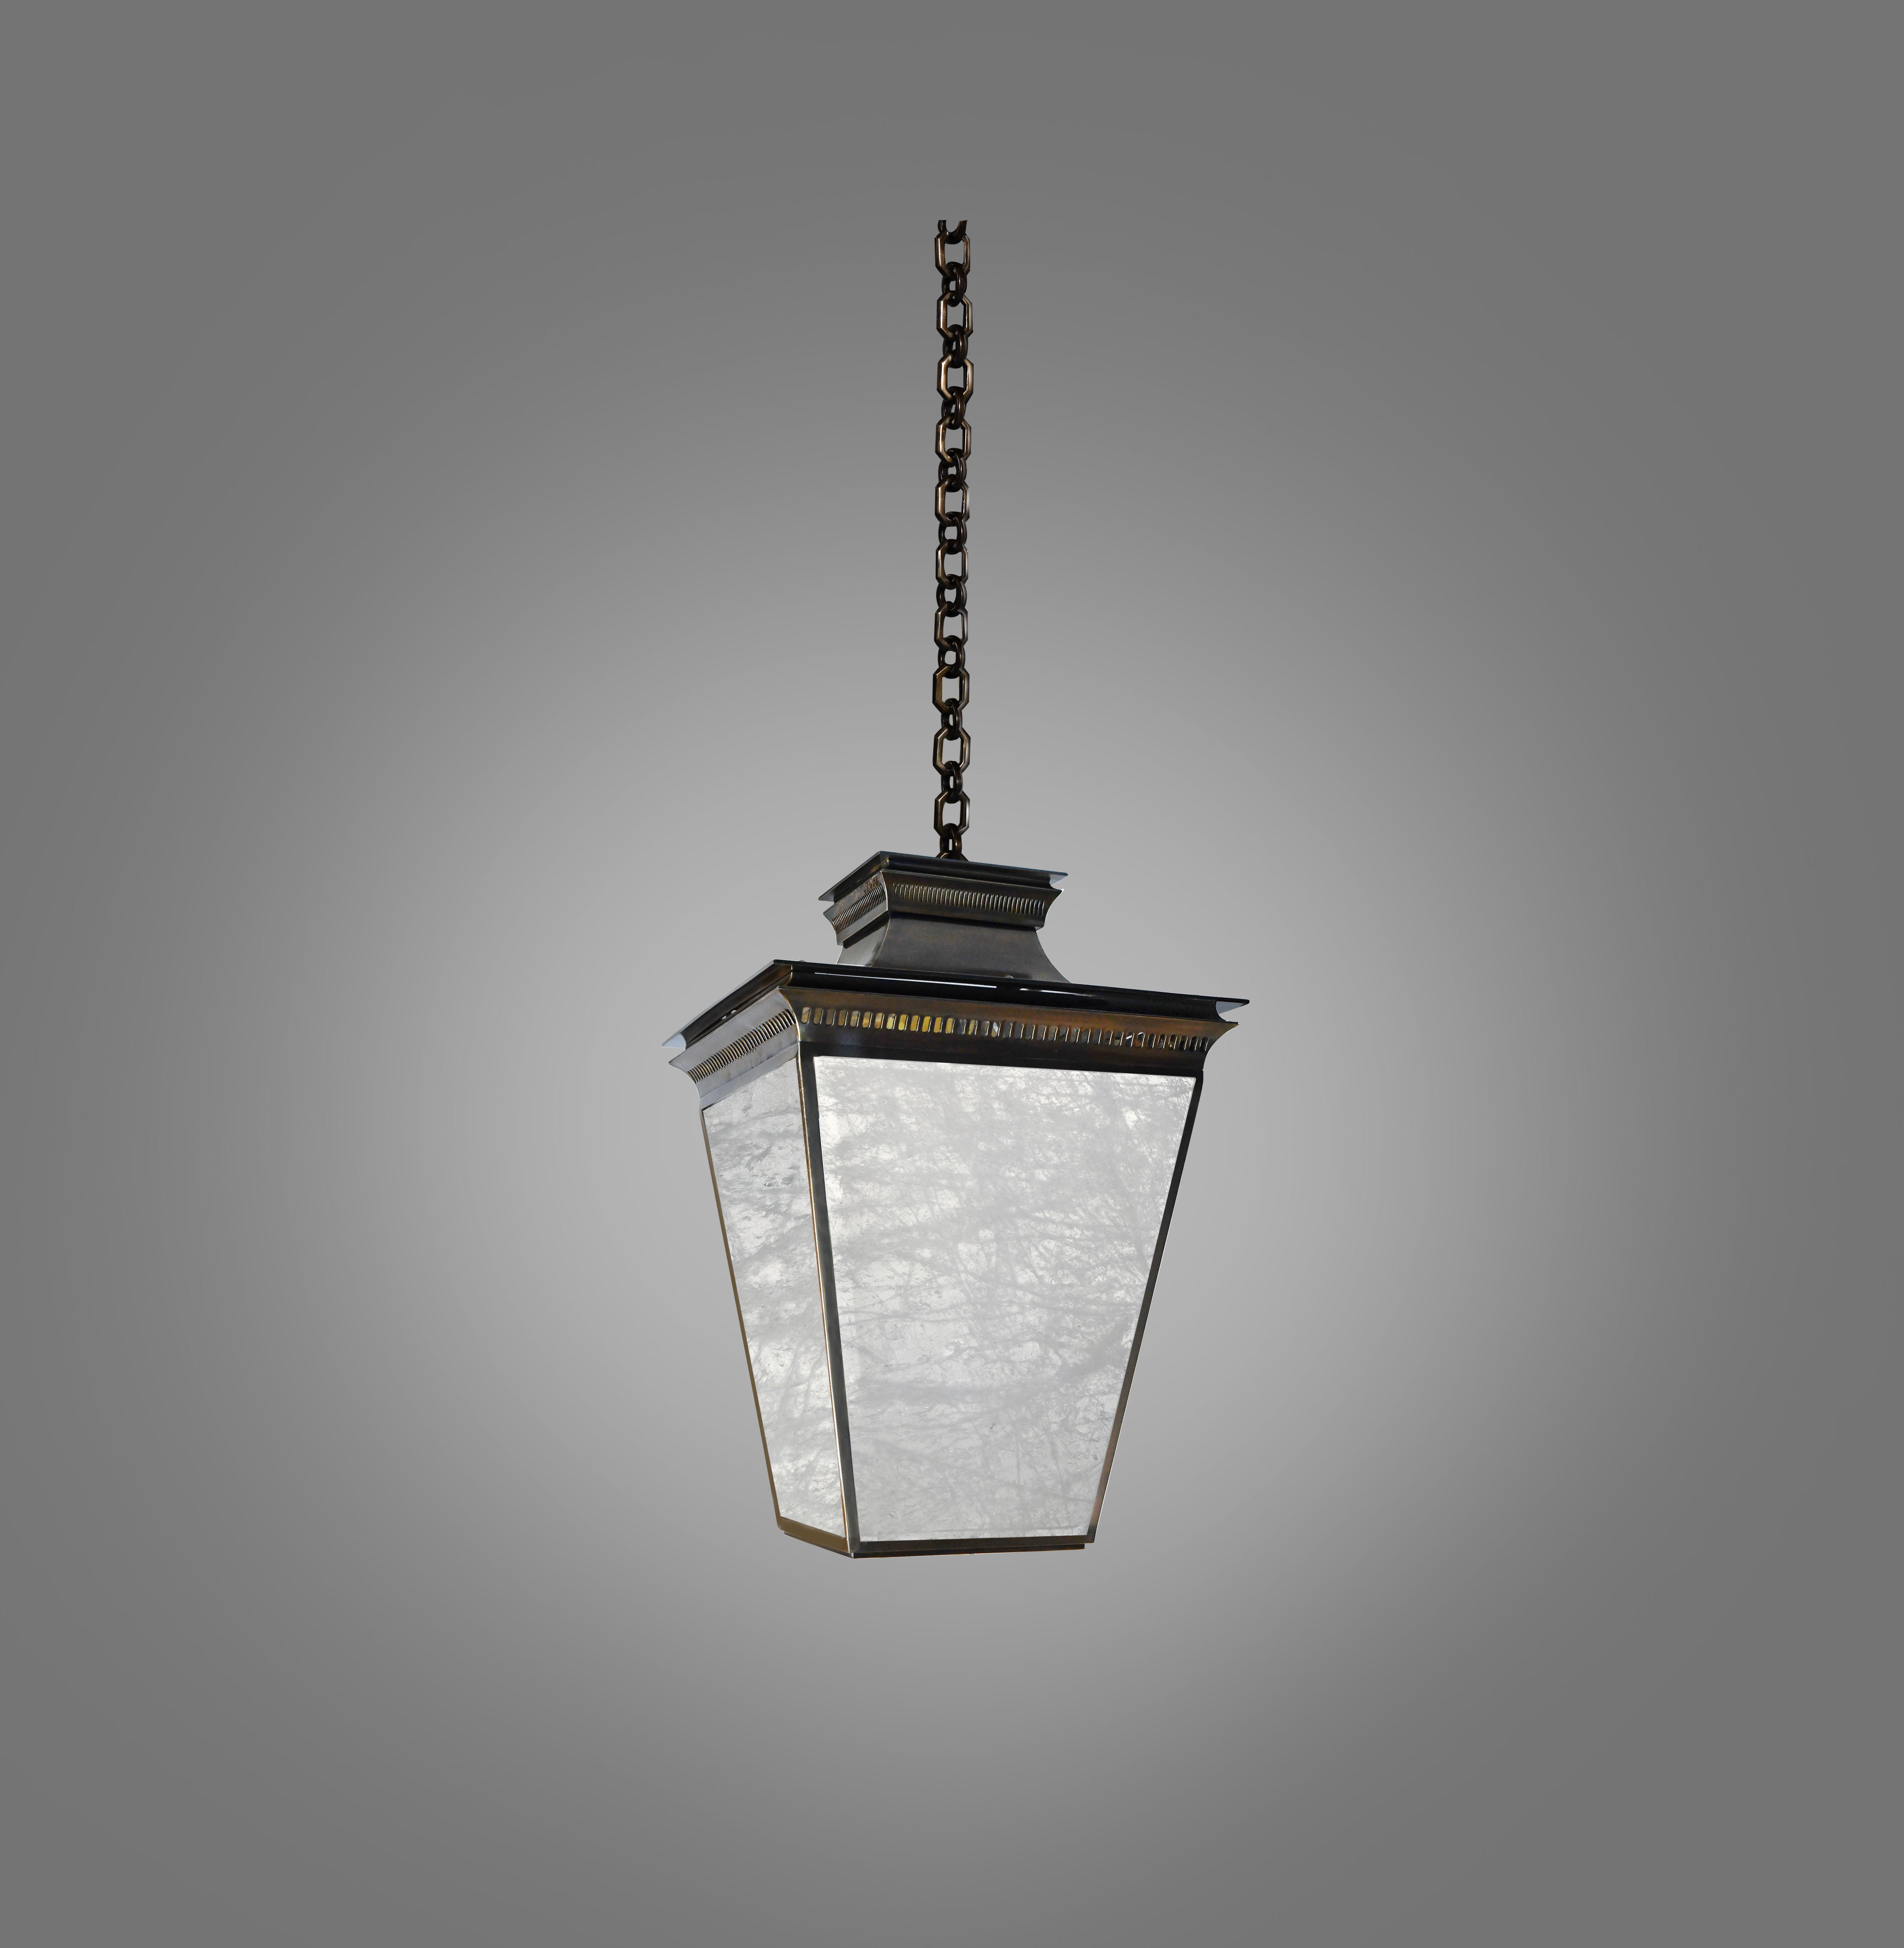 Large lantern with rock crystal panel, antique brass decoration finish.
Lantern dimension: 12”/H
4 sockets installed. Use four of 80 watts led long tube warm light bulbs. 320w max.
Light bulb supply.
Metal finish, size and quantity upon